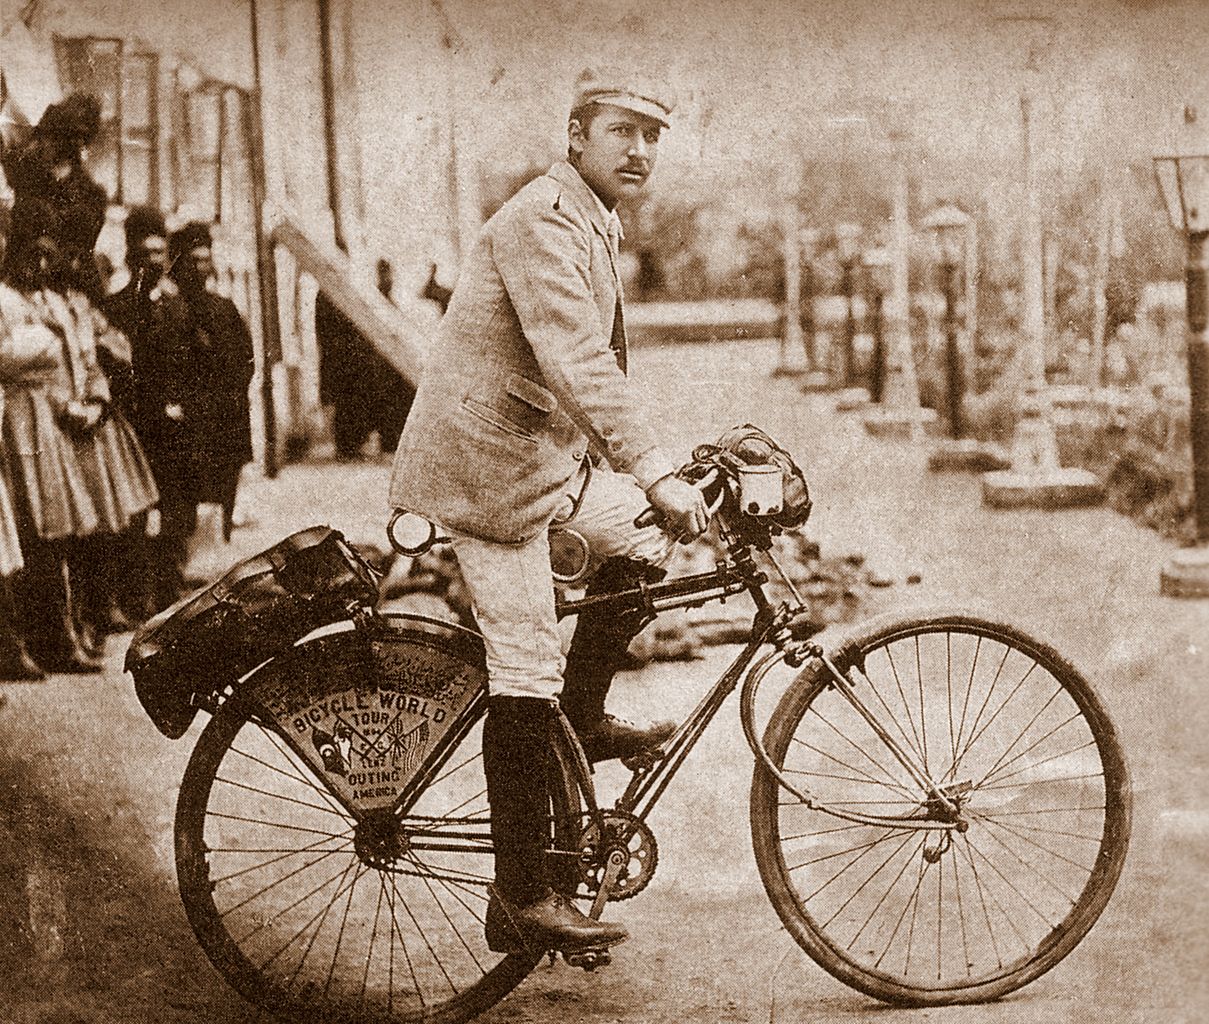 The black and white image shows a man in a suit and hat riding a bicycle. He is holding onto the handlebars with one hand. There are other people in the background.